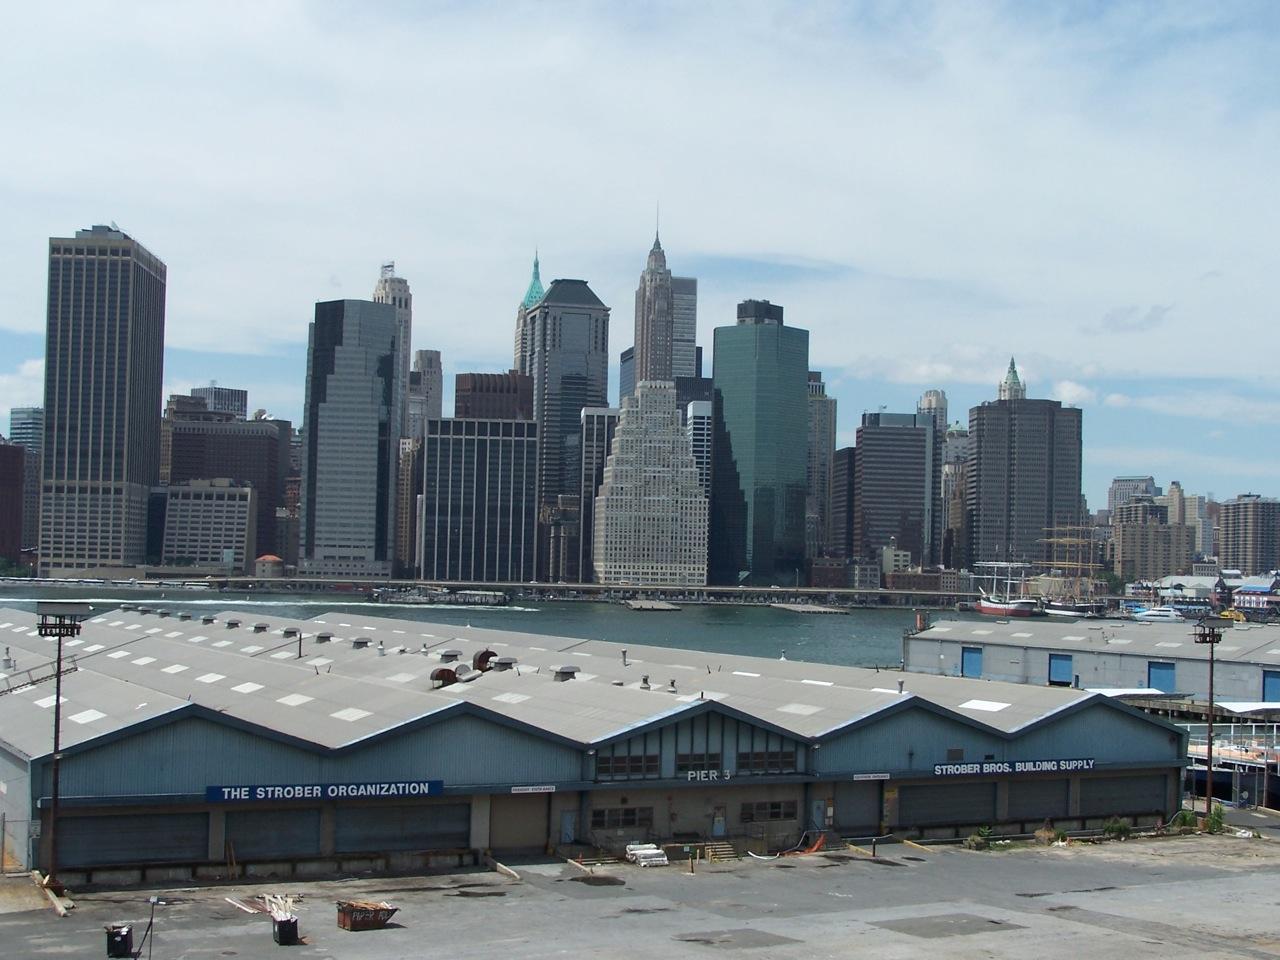 View of the piers prior to park construction with lower Manhattan in the background.